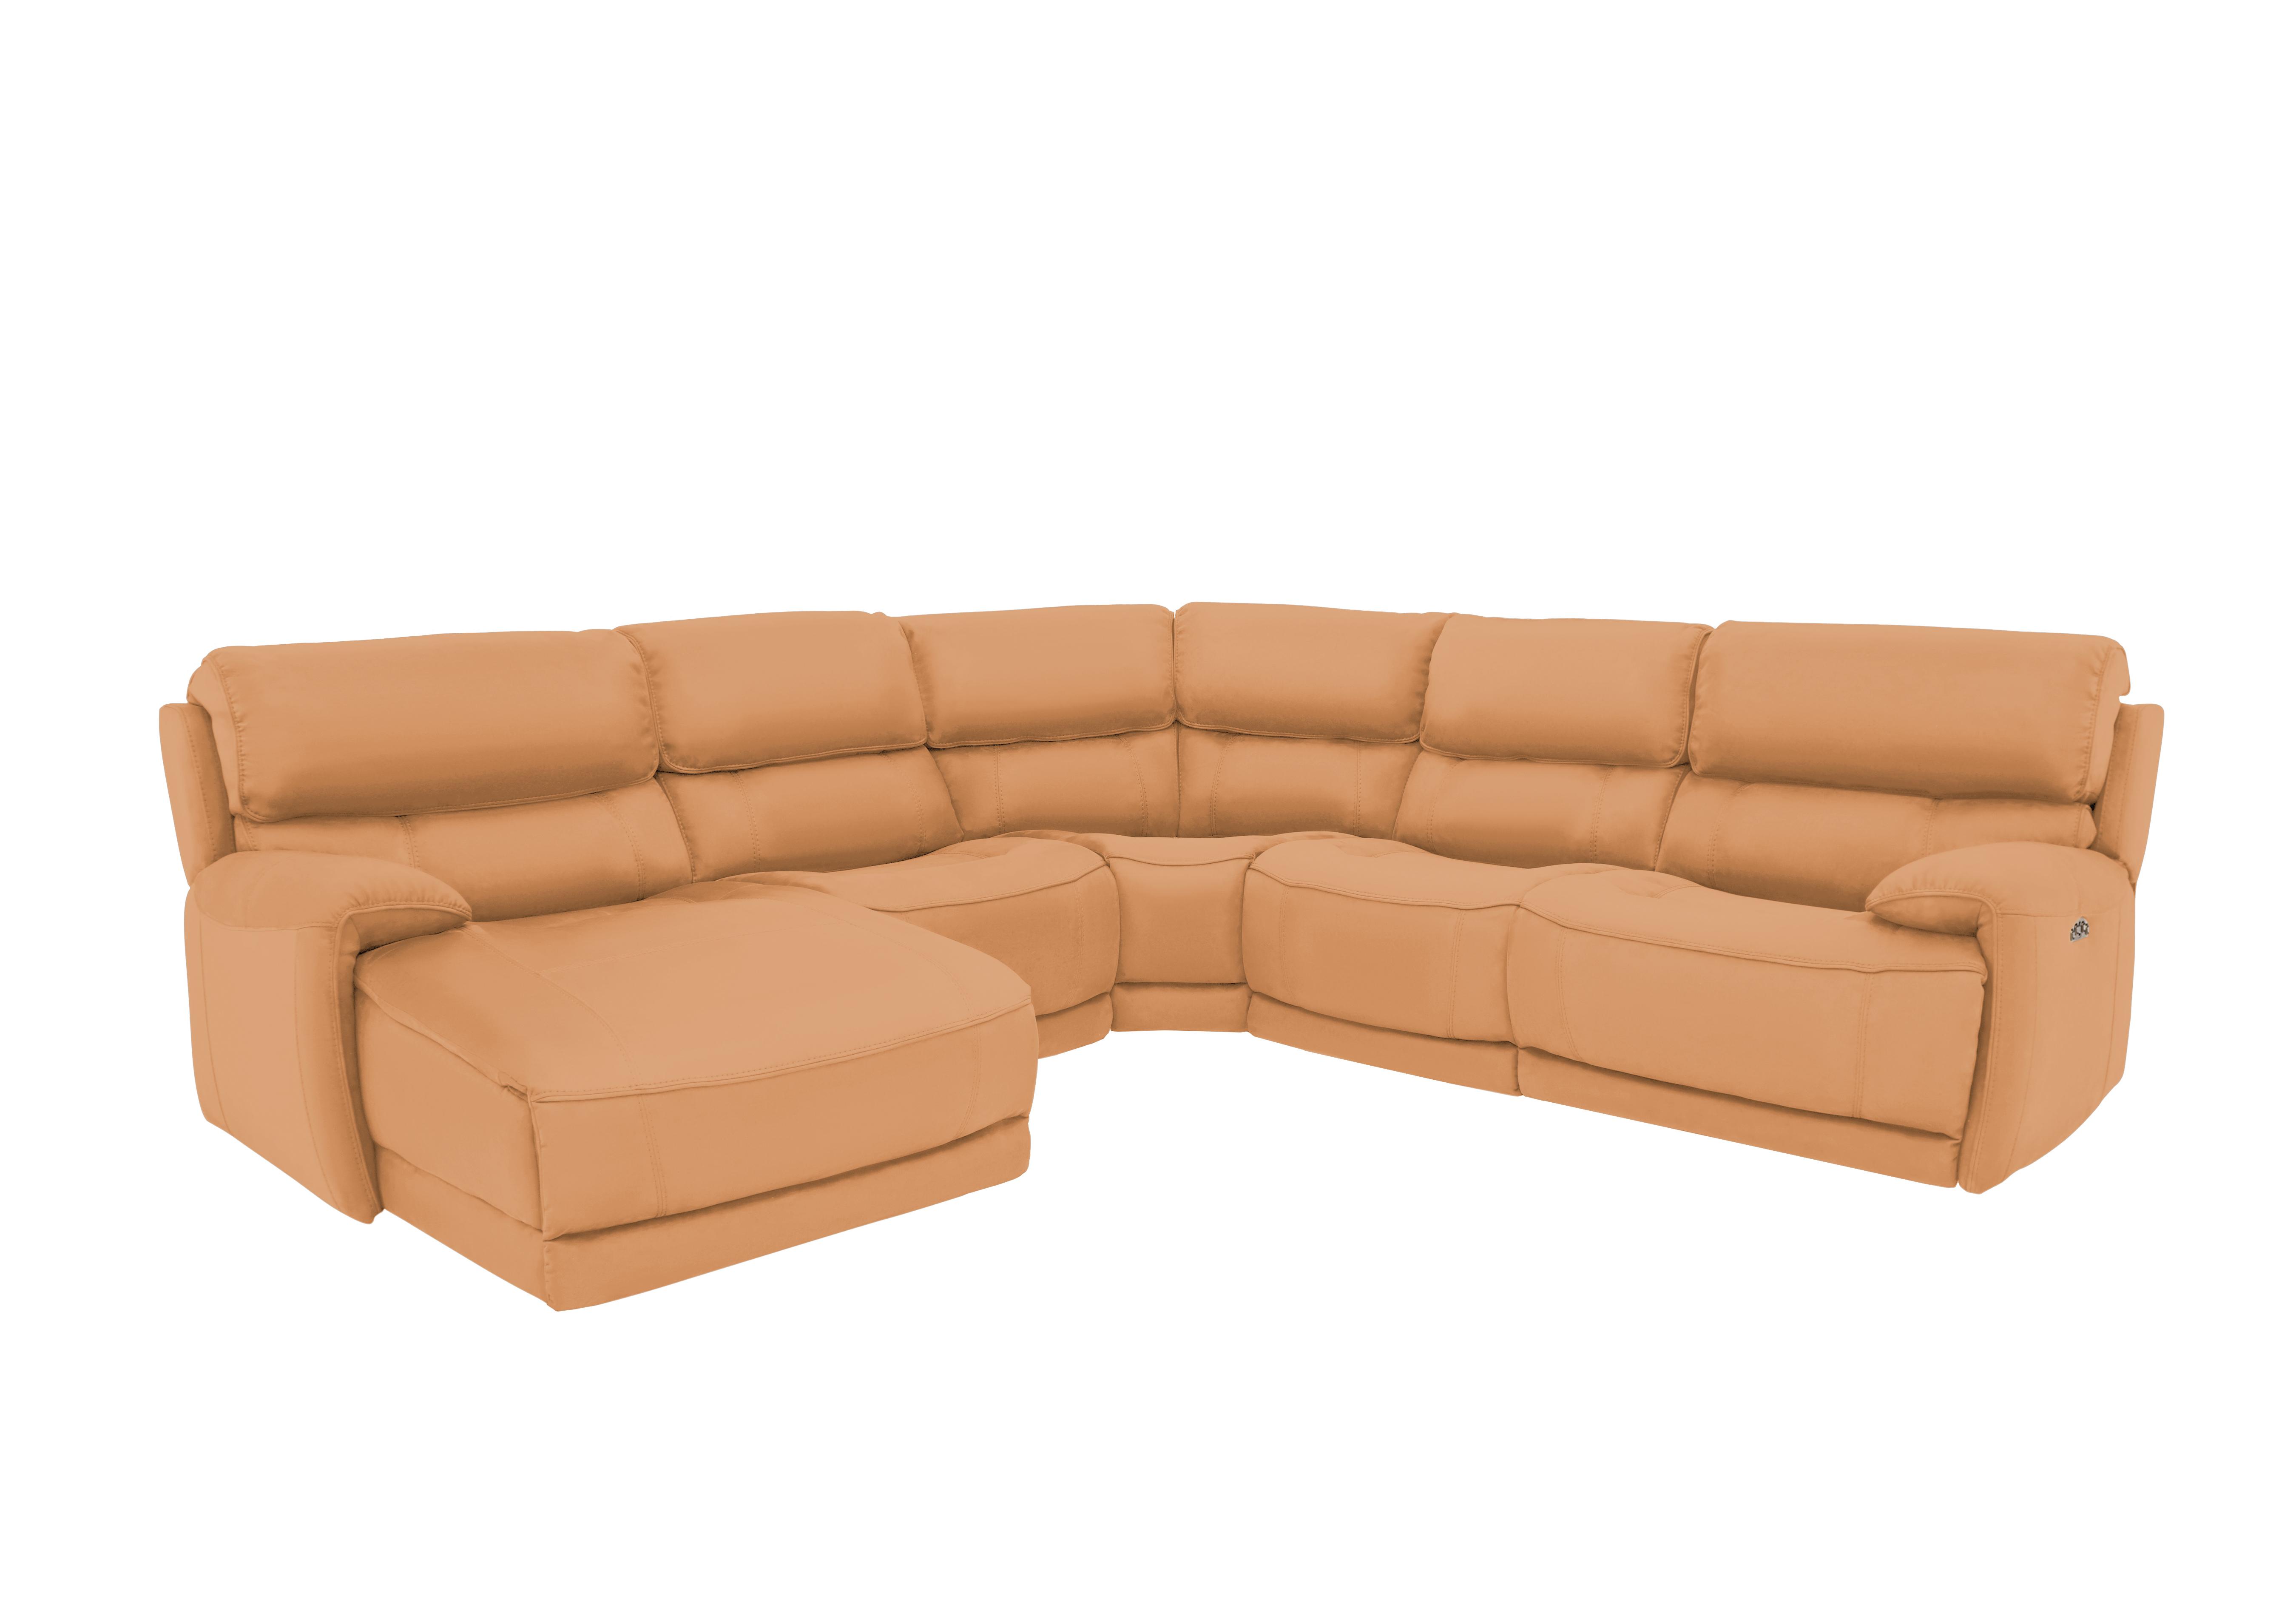 Link Leather Corner Chaise Power Sofa in Nc-335e Honey Yellow on Furniture Village